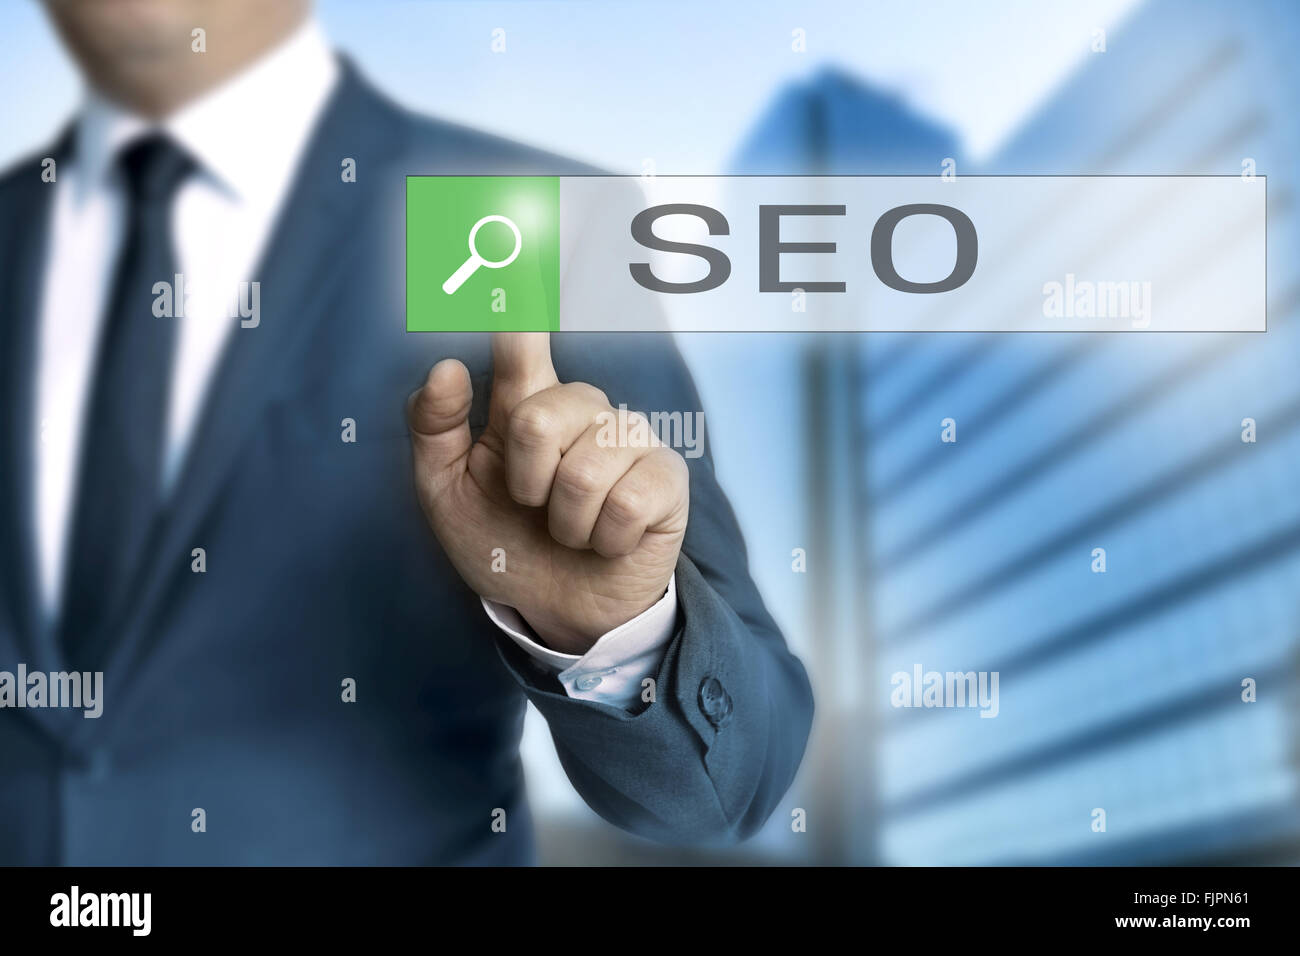 seo browser is operated by businessman. Stock Photo